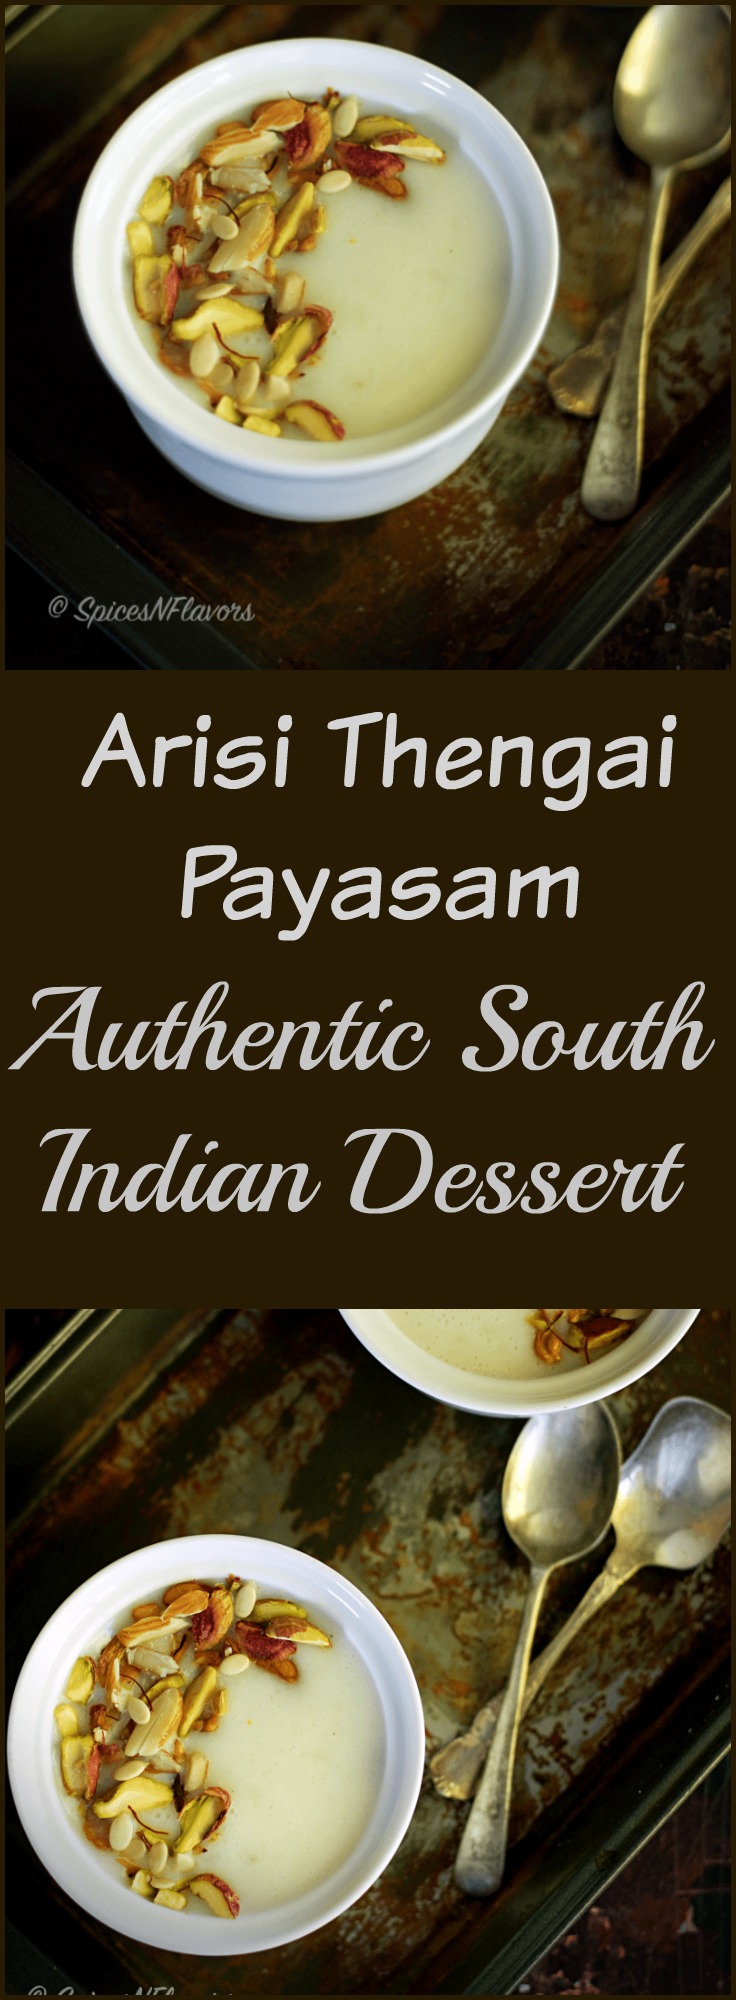 Arisi Thengai Payasam Rice Coconut Kheer Indian Pudding authentic traditional south indian pudding mom's special